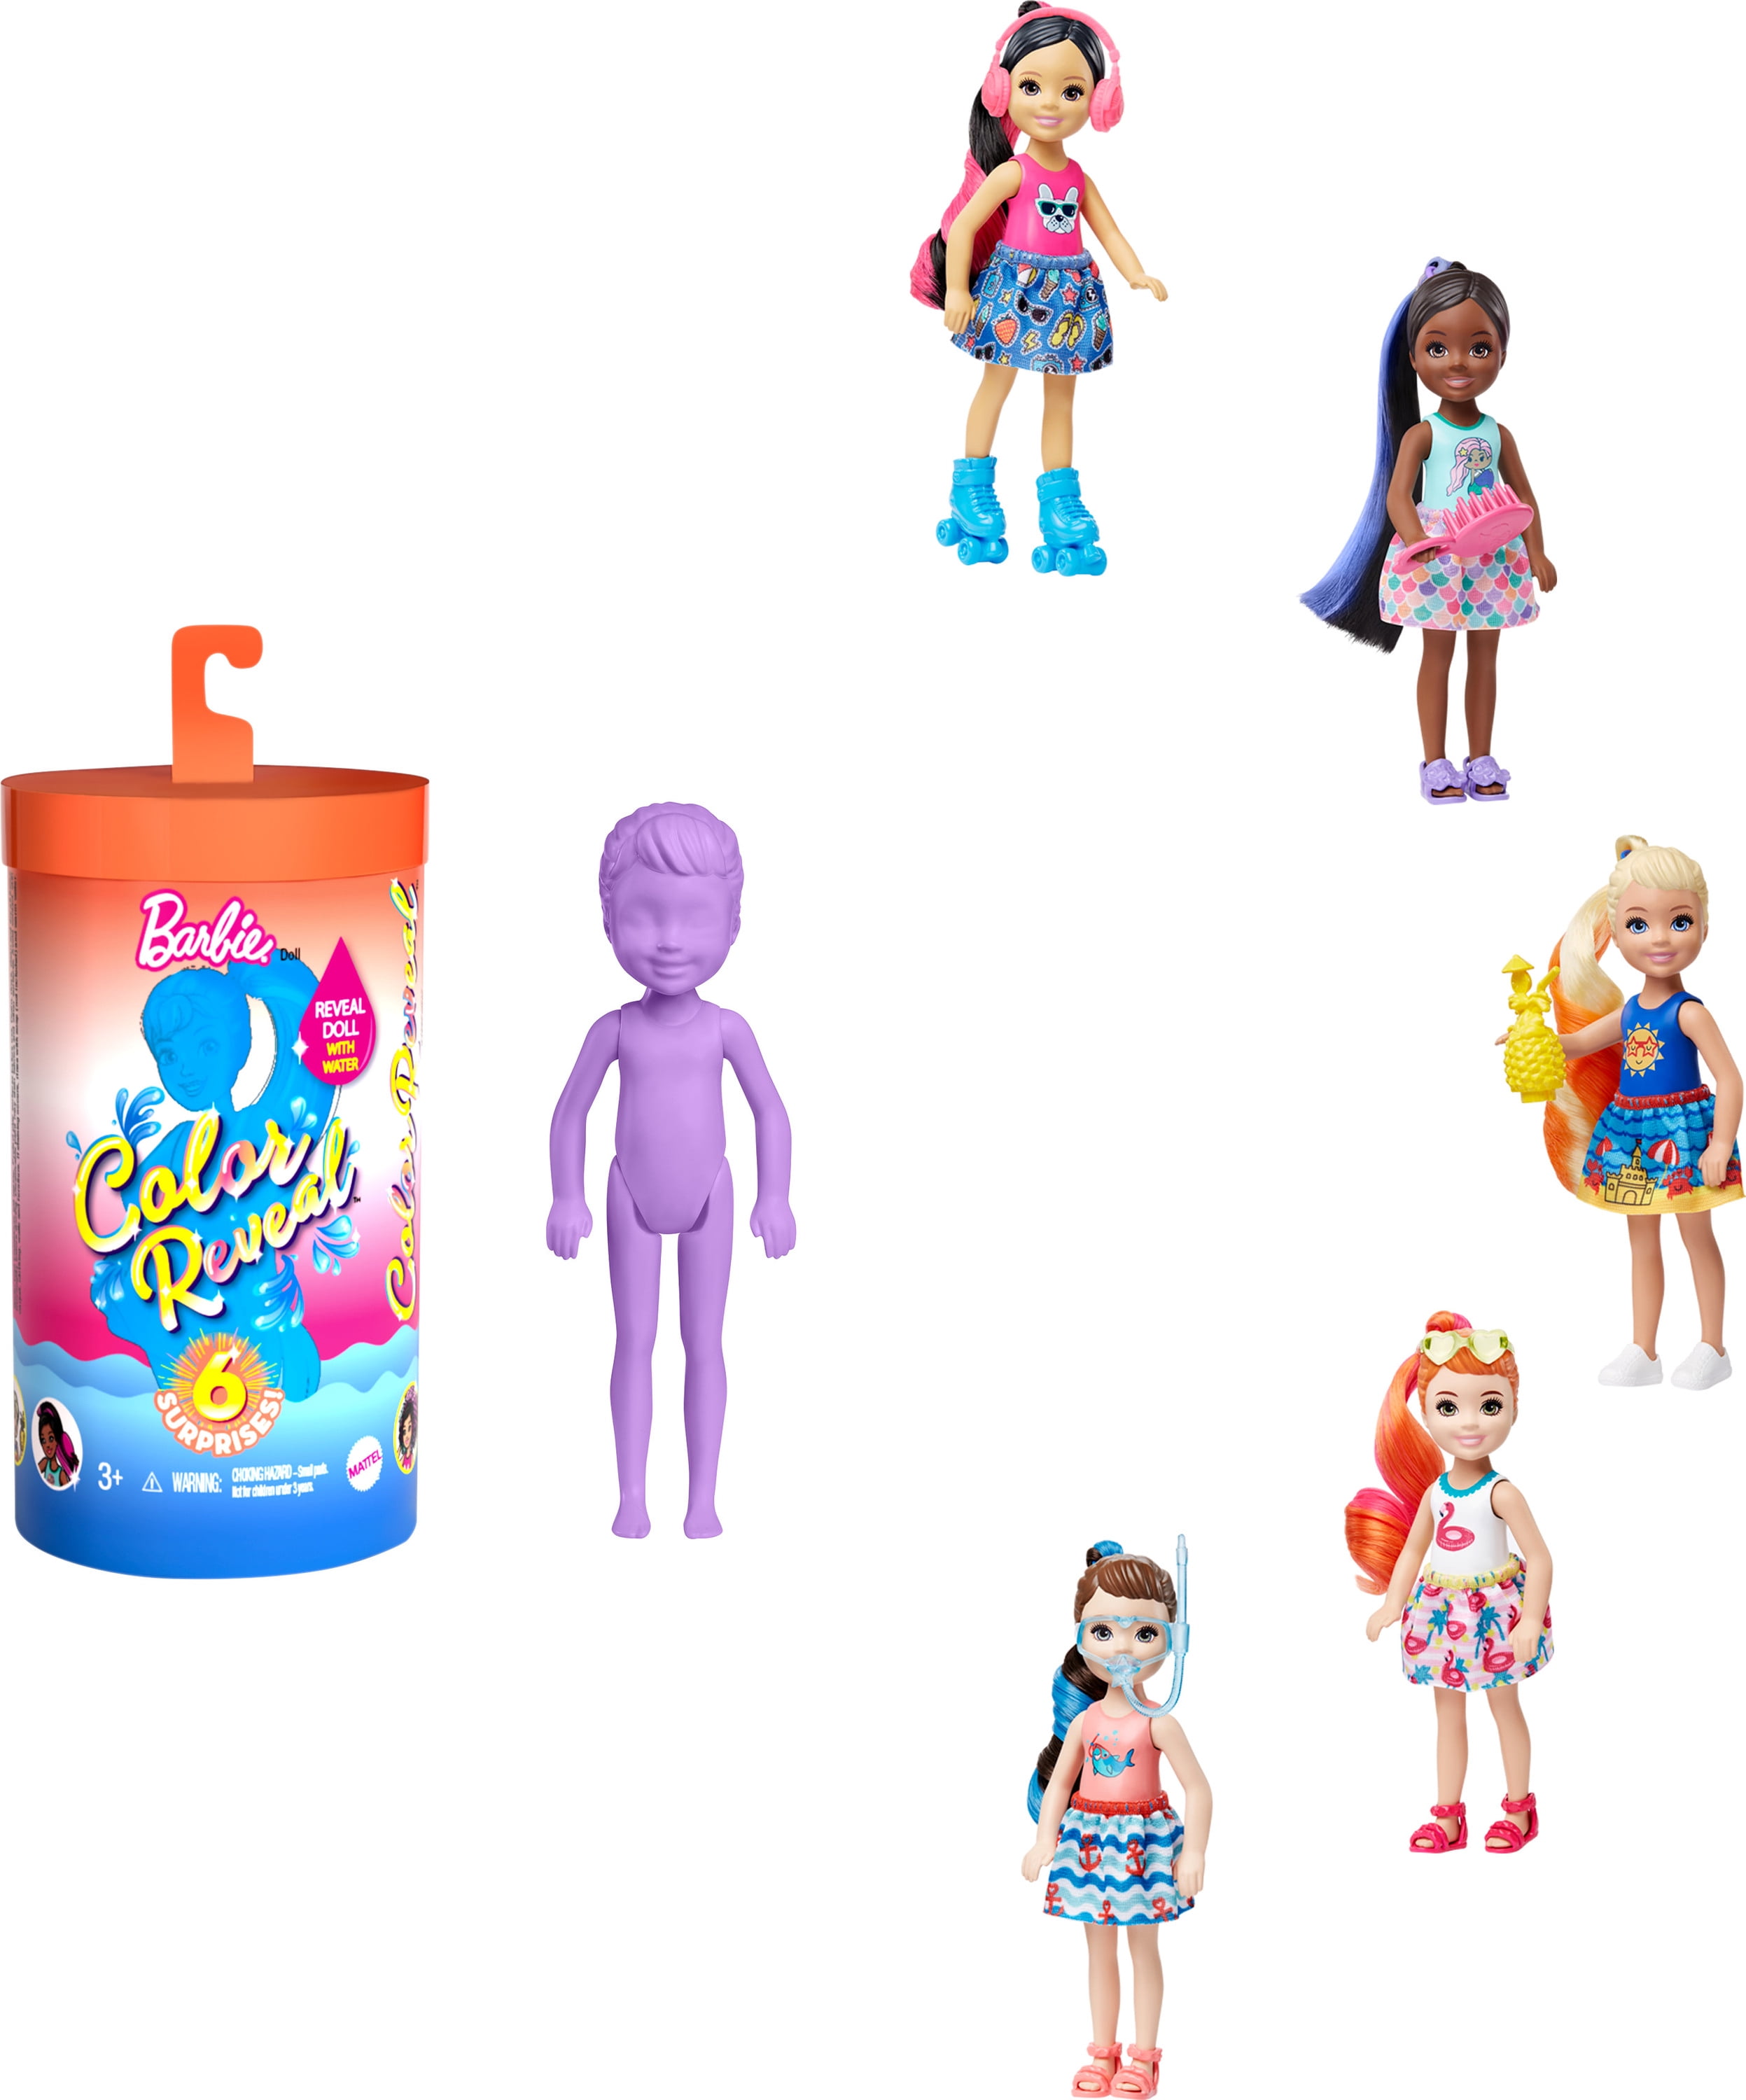 Barbie Doll Colour Reveal Doll with 6 Surprises 